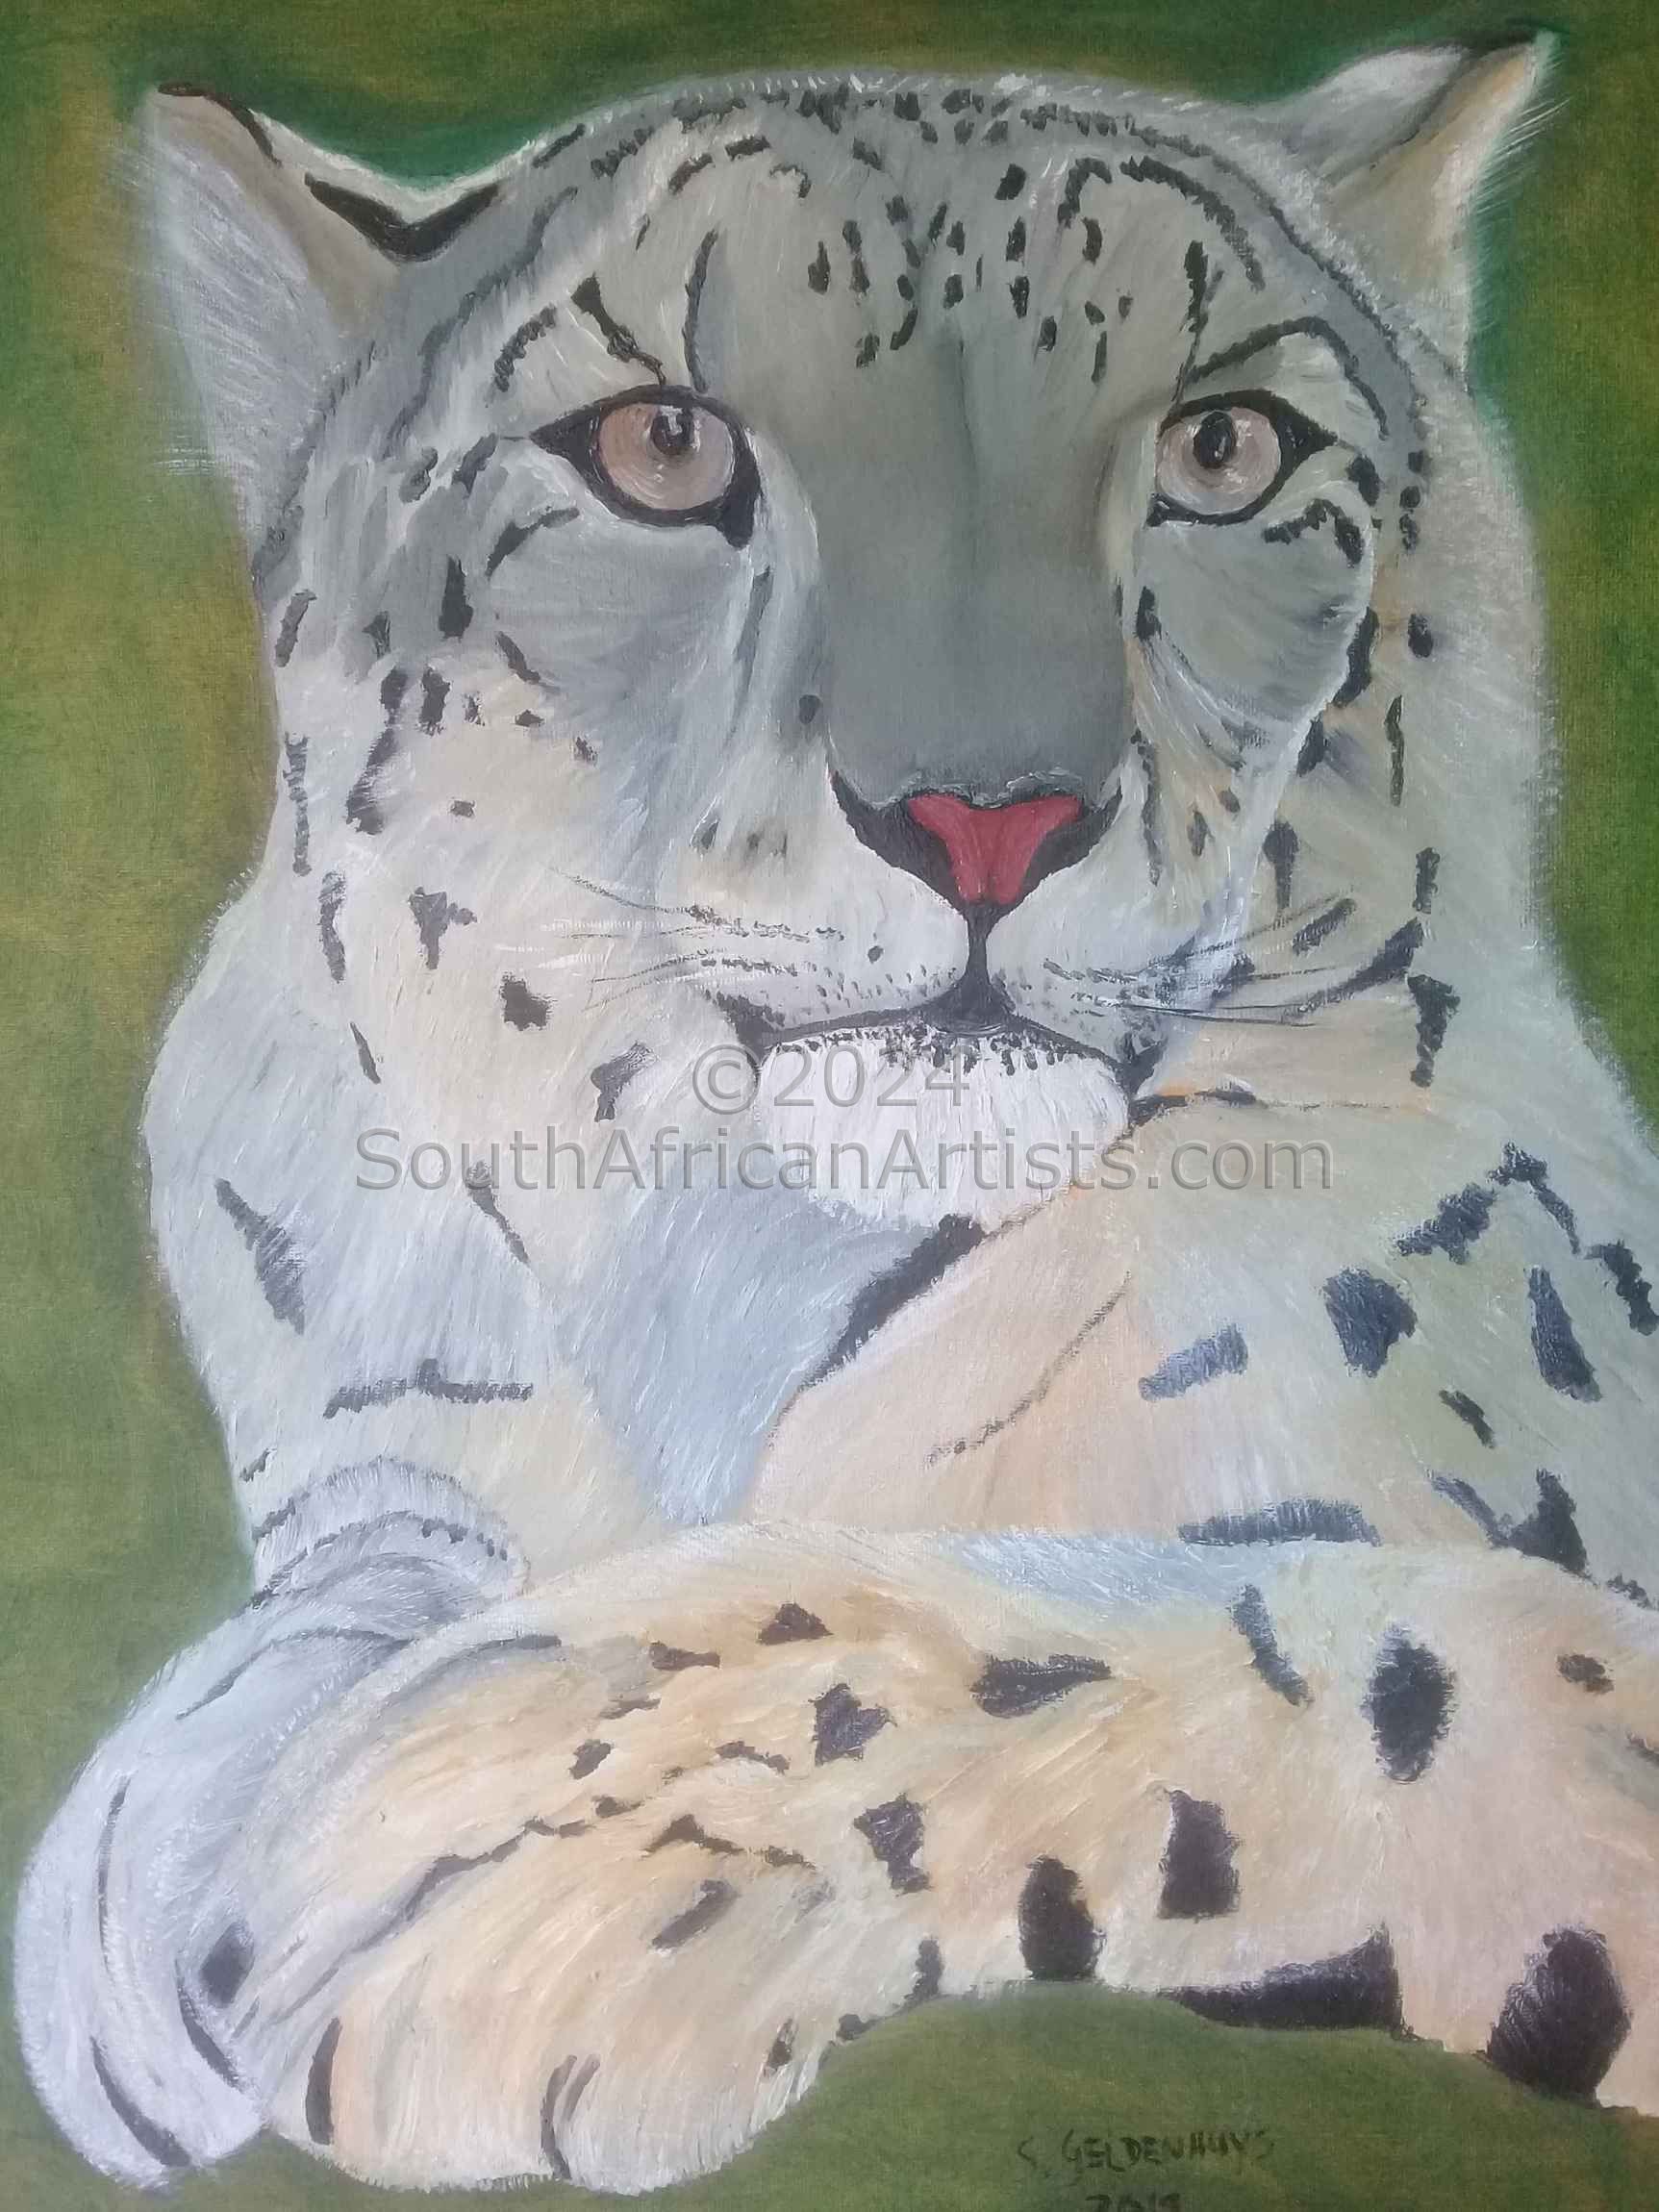  The Snow Leopard